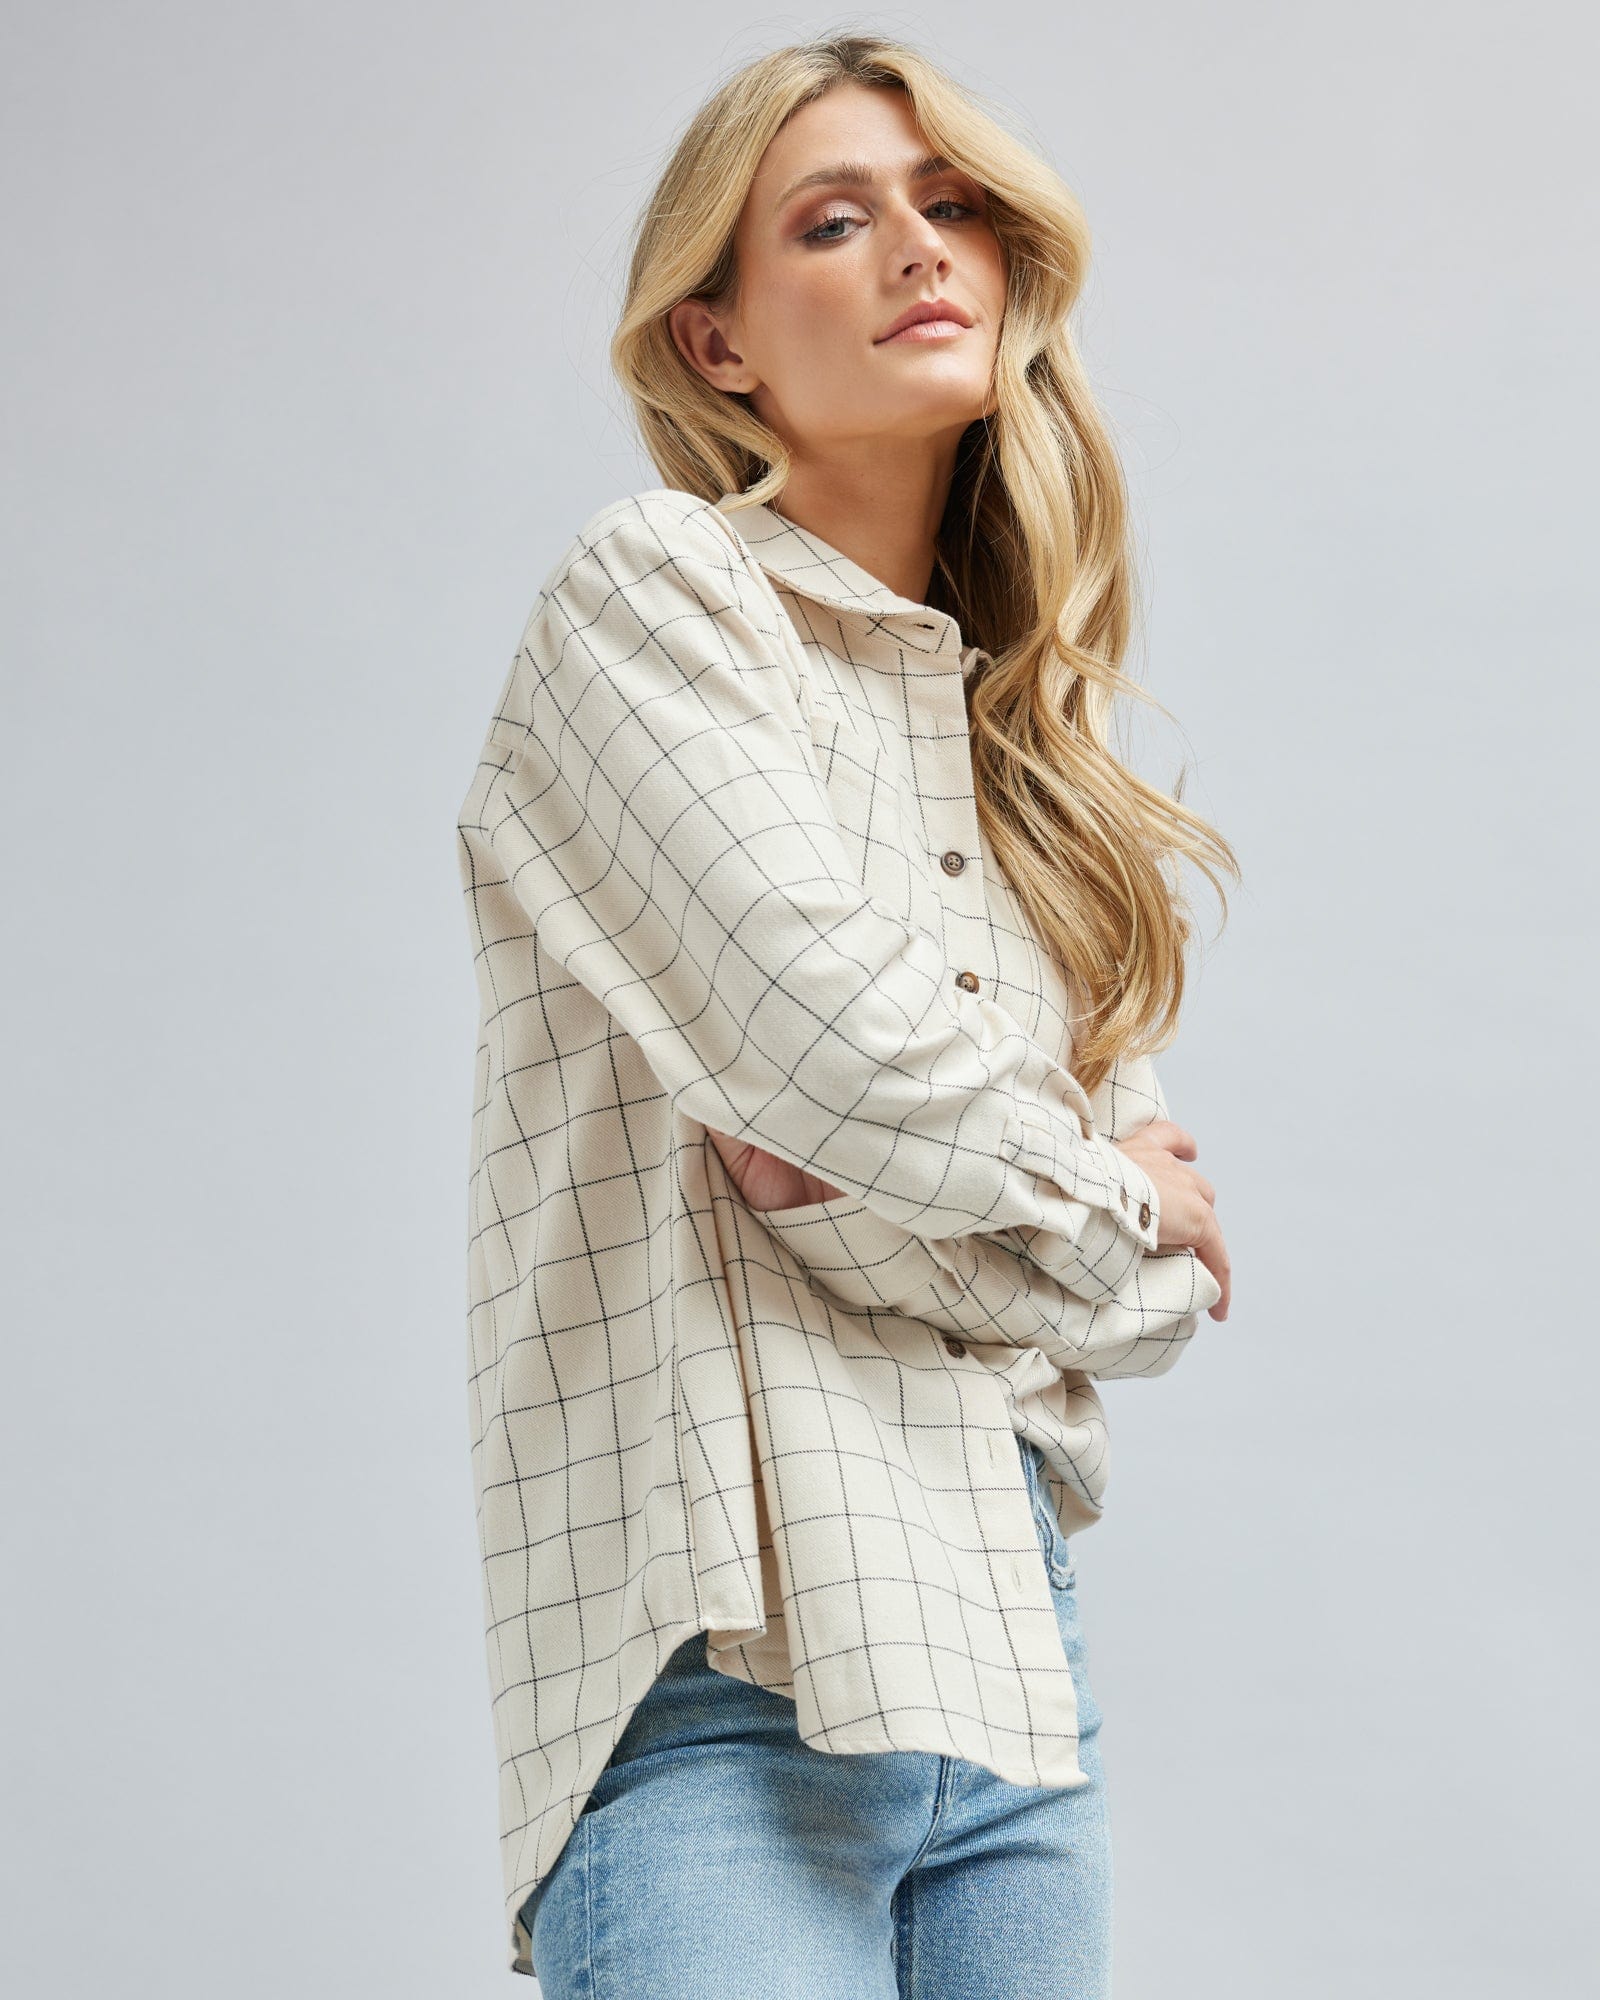 Woman in a long sleeve, plaid, button down blouse